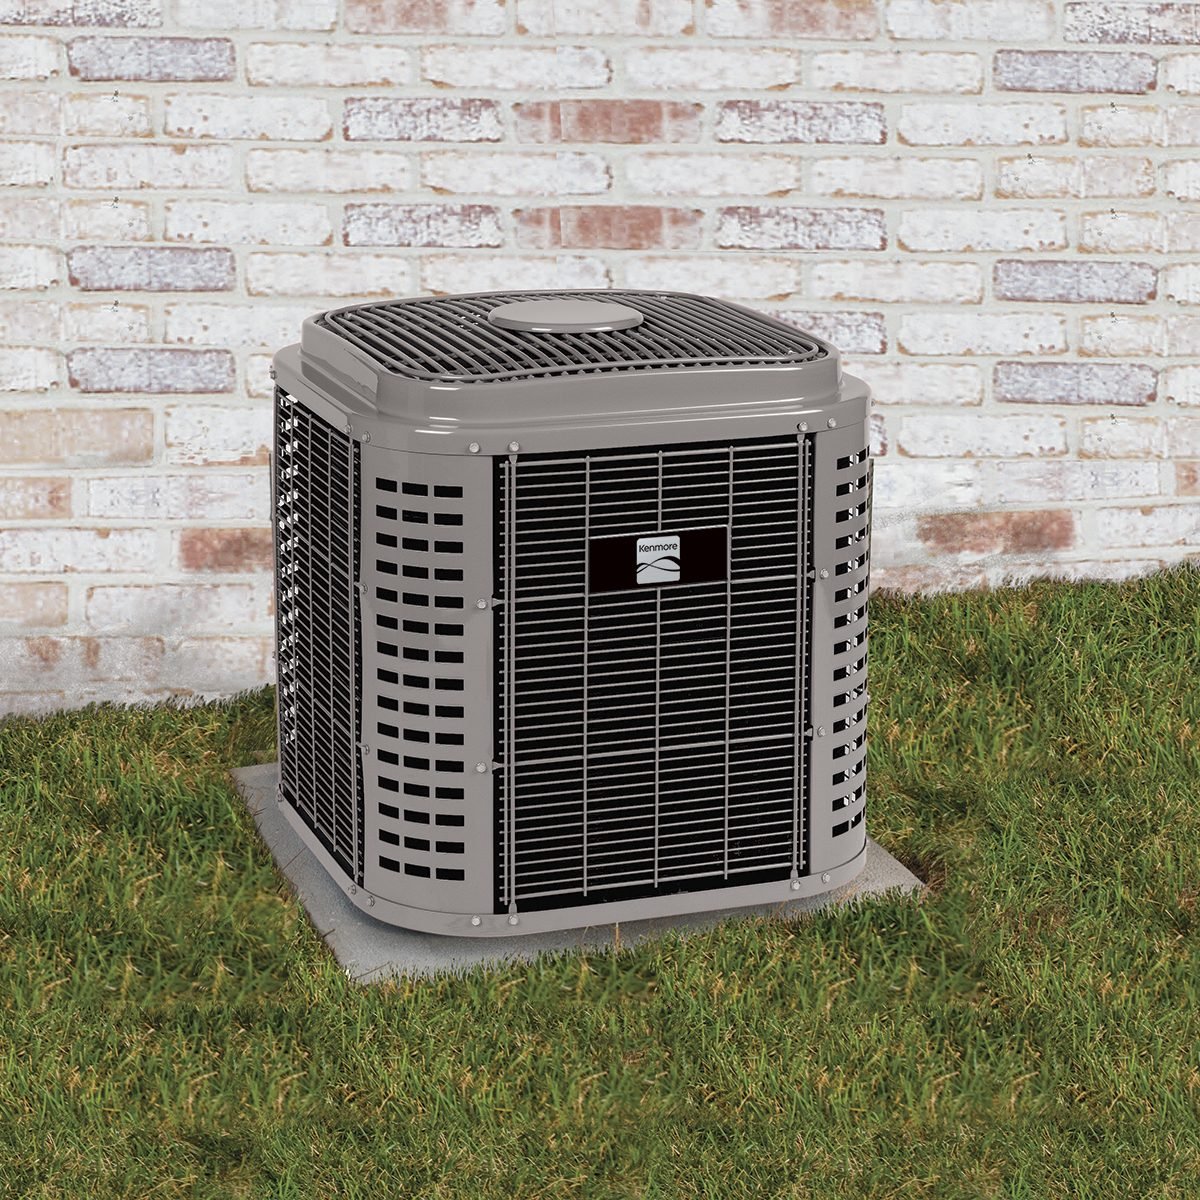 HVAC Maintenance Inspection Checklist: Is Your Air Conditioner Ready for Summer?